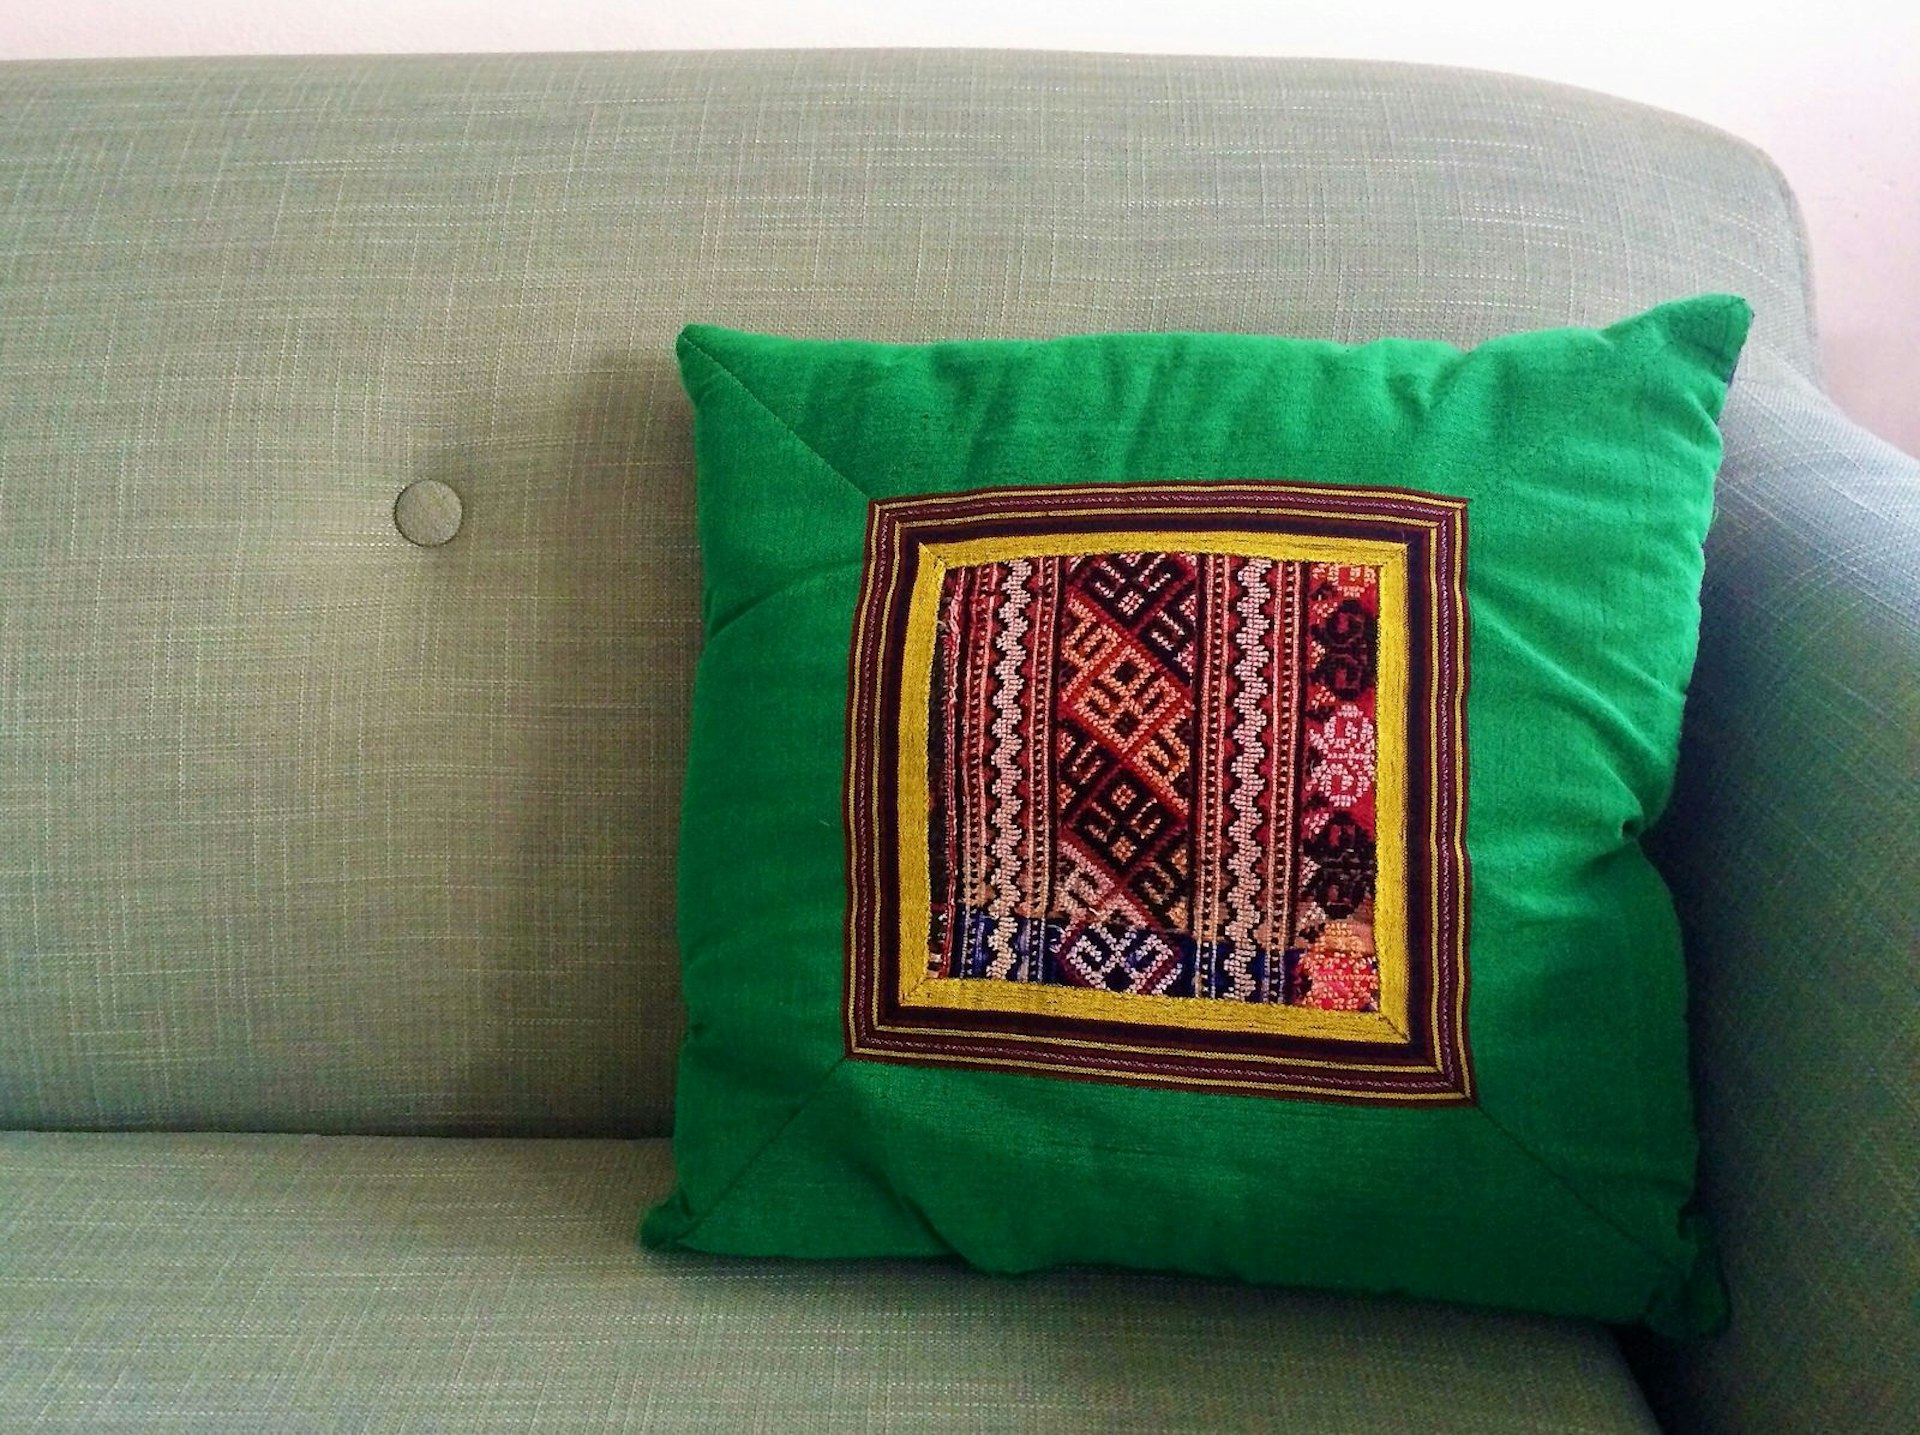 A green cushion with a patterned square in the middle resting on the arm of a sofa